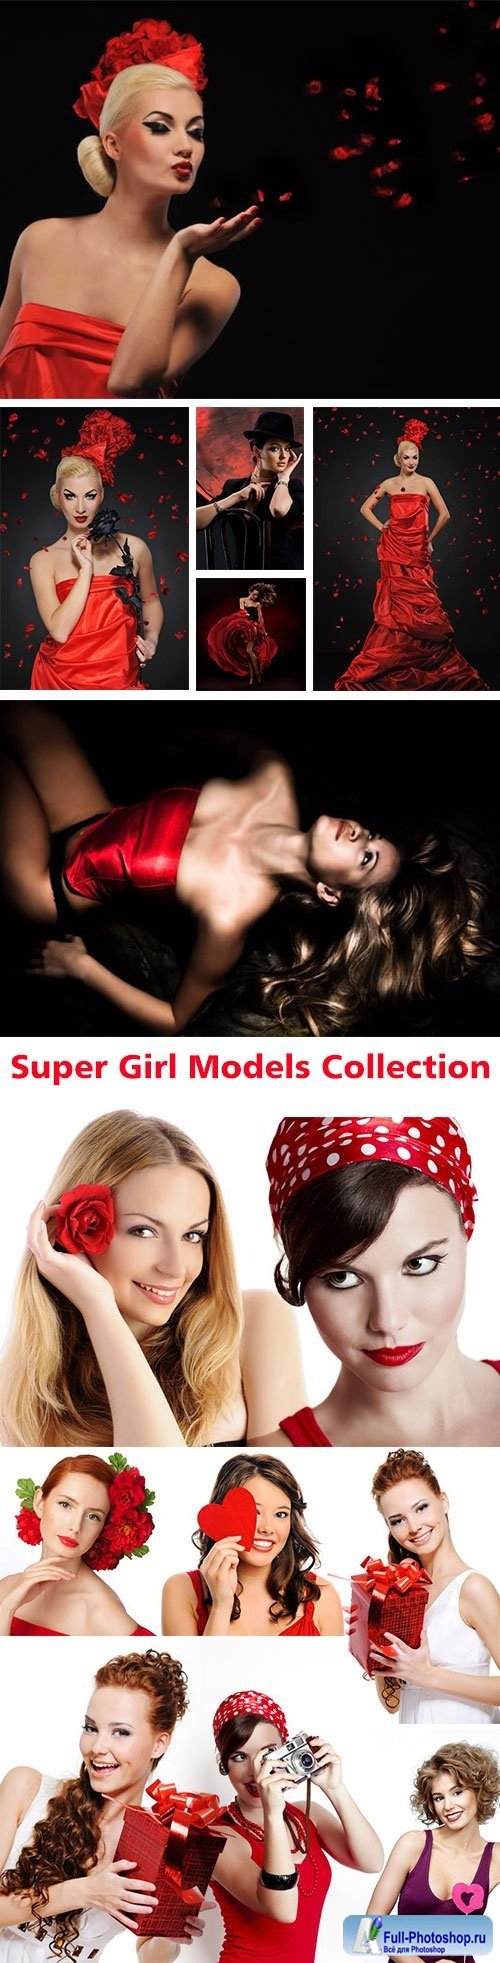 Super Girl Collection